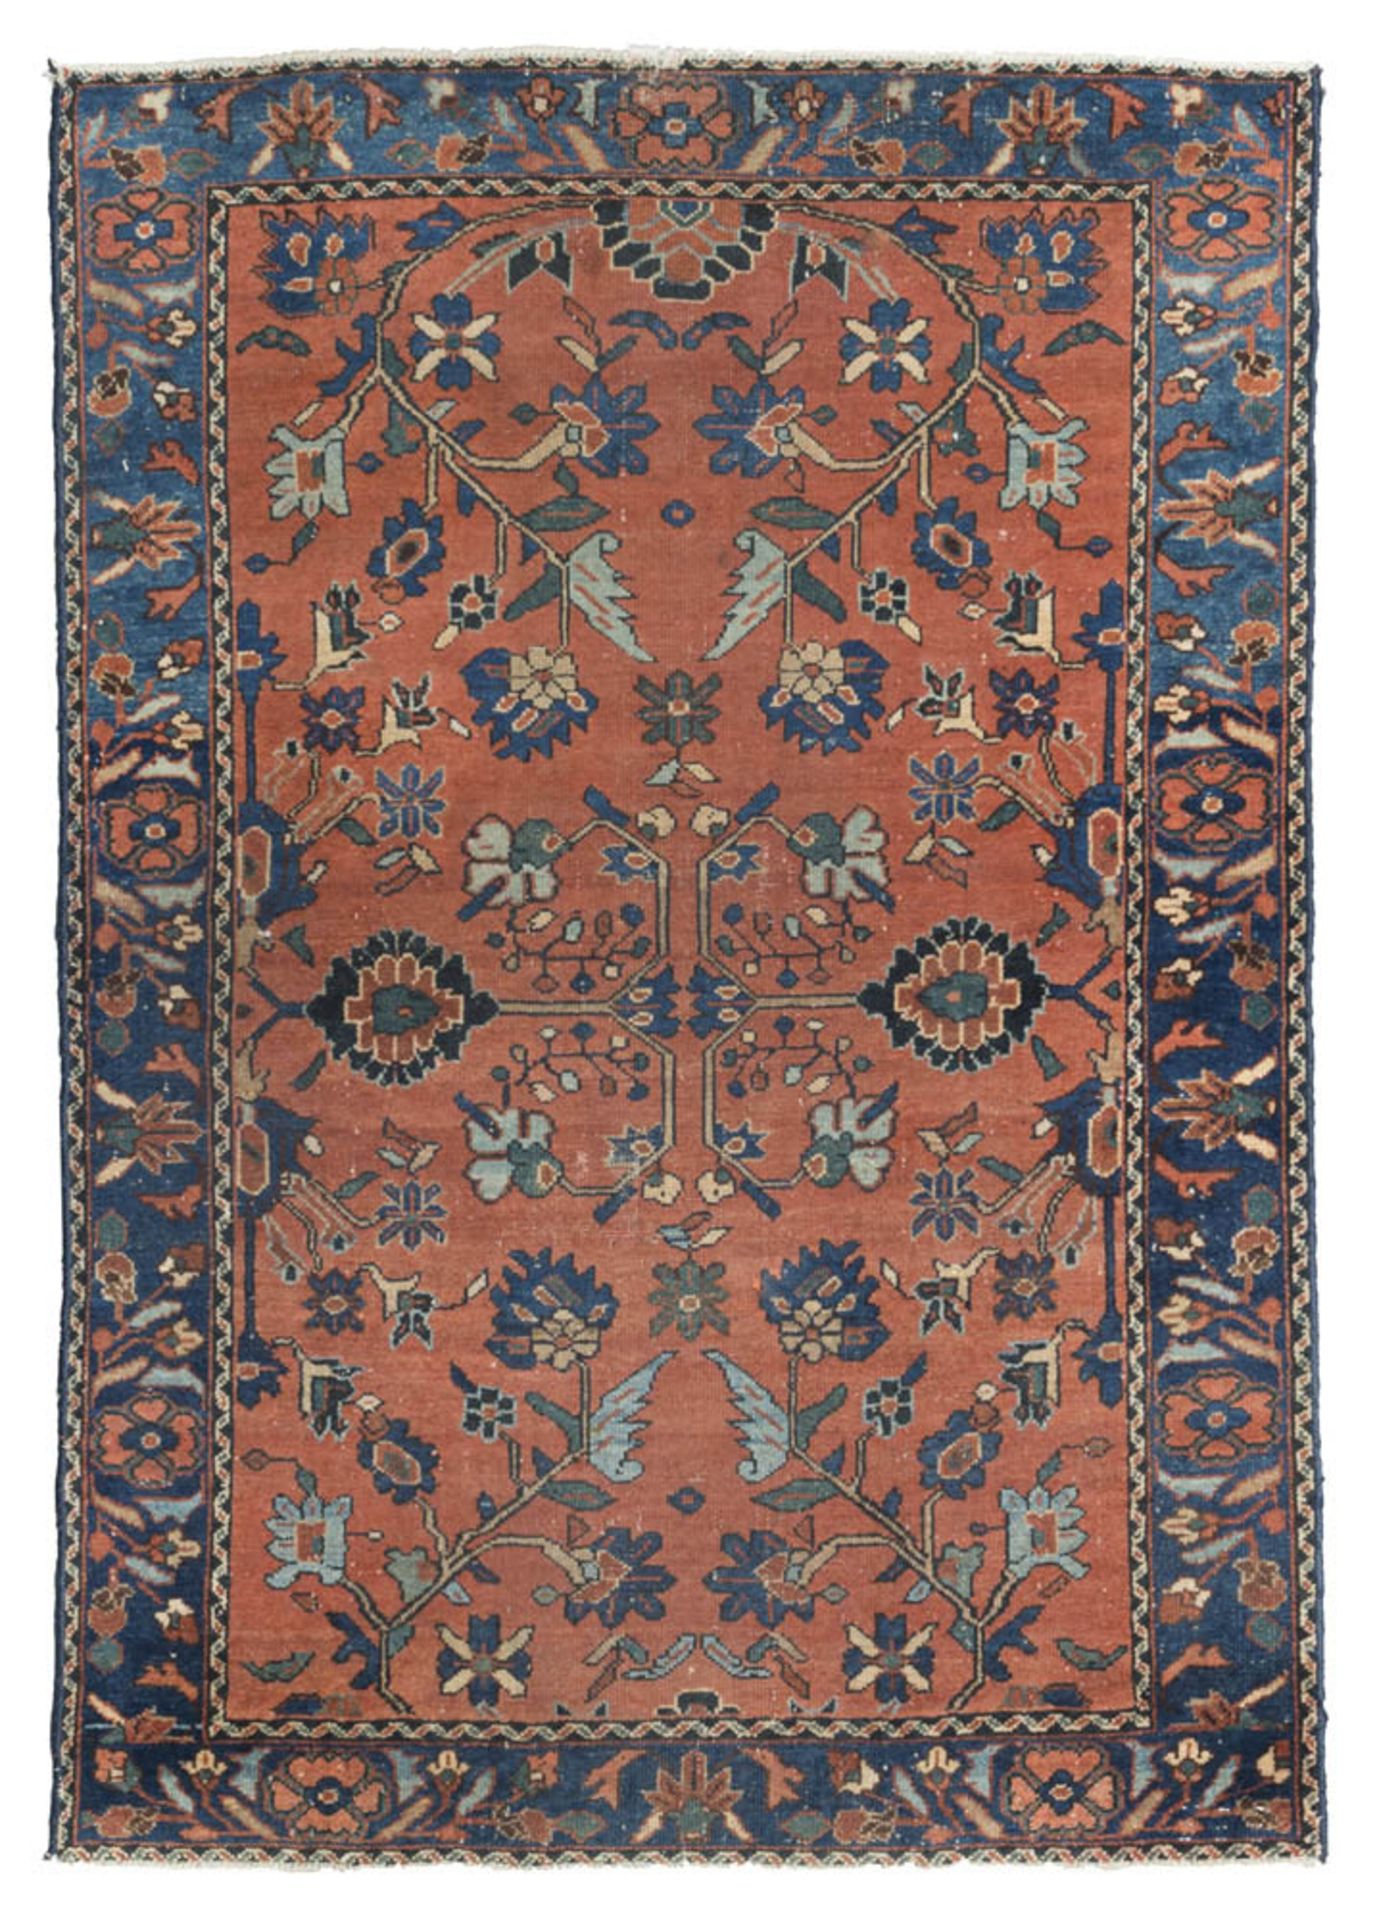 A RARE ANCIENT BAKTHIARI CARPET, LATE 19TH CENTURY with sketch to shoots, flowers and herati, in the